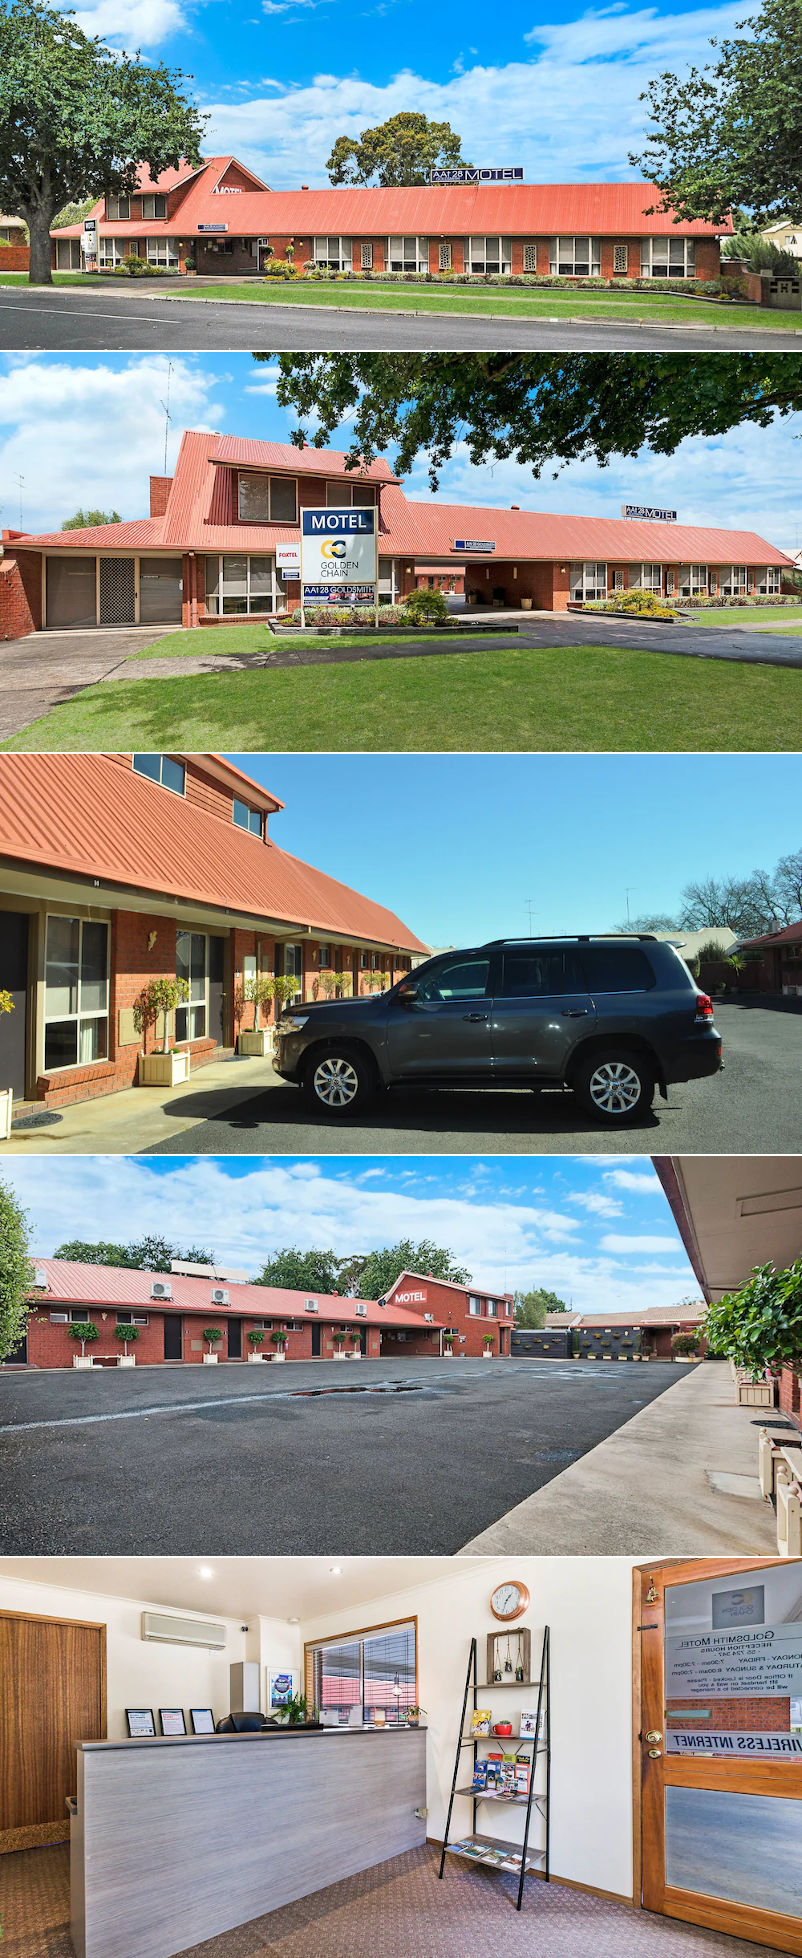 AAt 28 Goldsmith Motel - Grounds and facilities